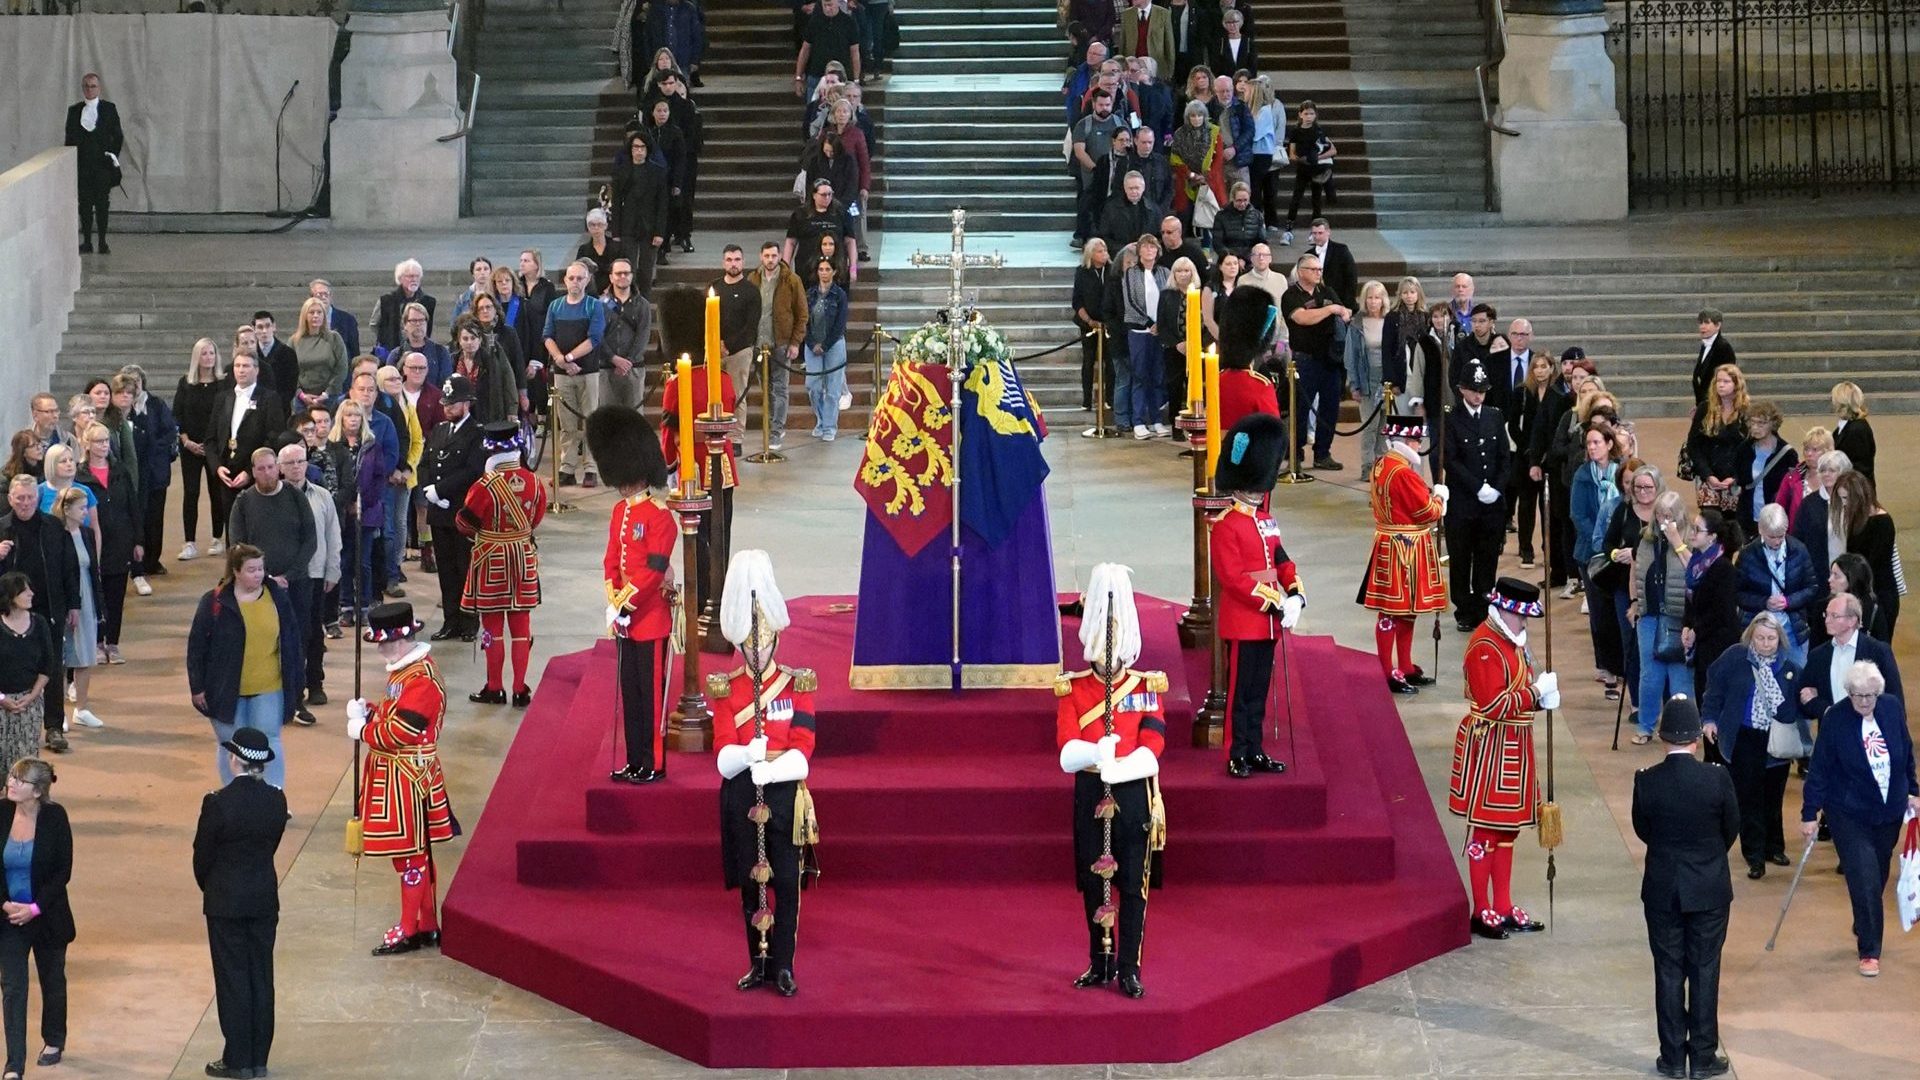 Members of the public file past the coffin of Queen Elizabeth II in Westminster Hall, September 2022. Photo: Yui Mok/AFP/Getty